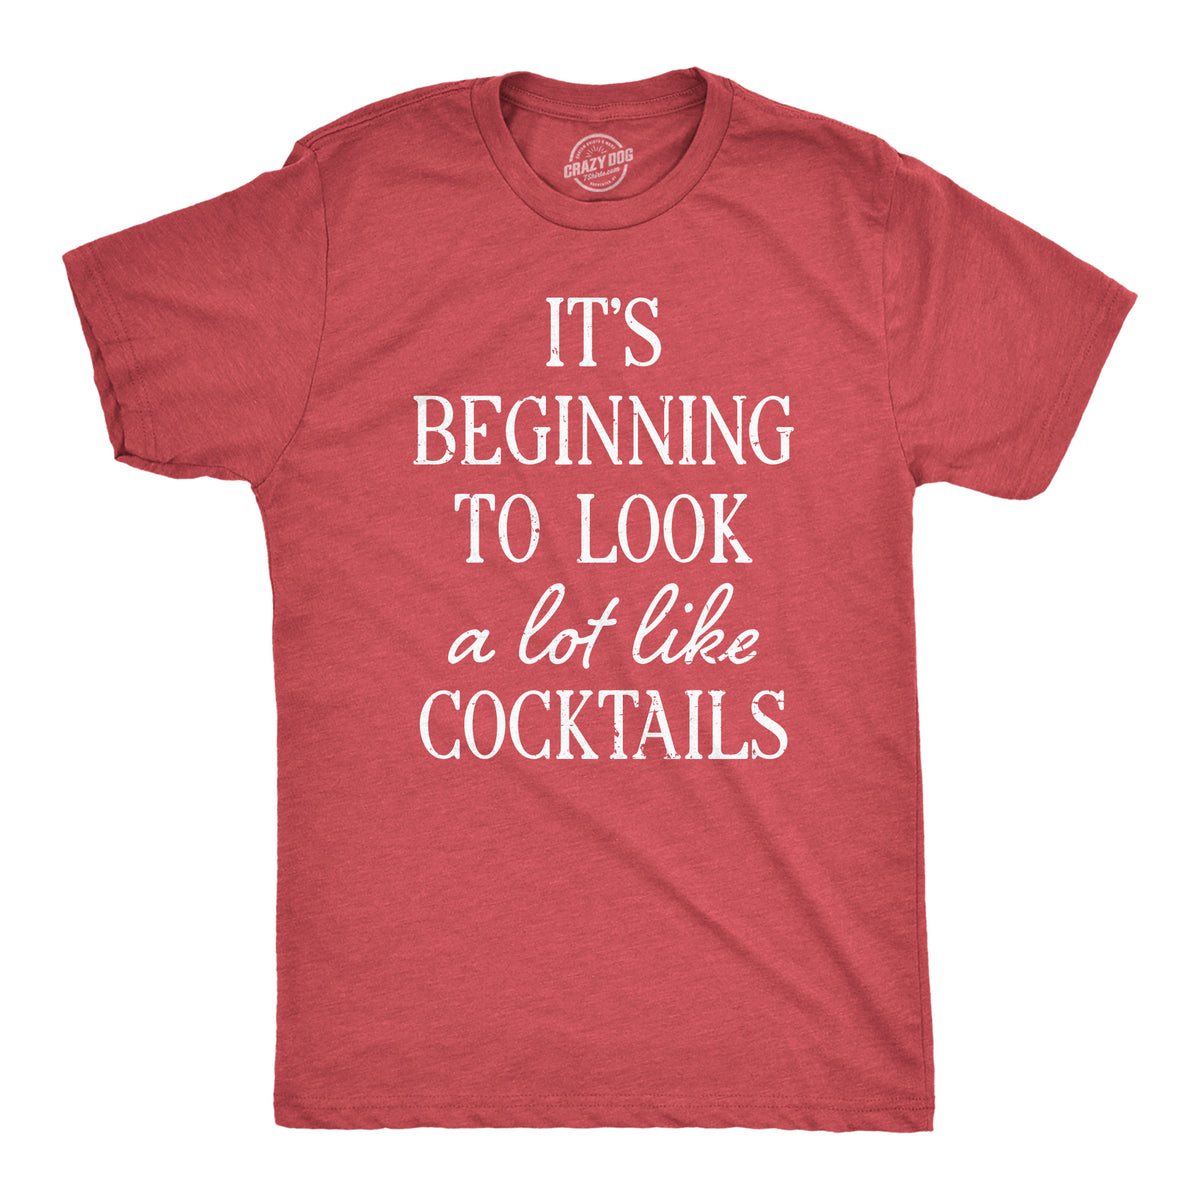 Funny Heather Red - COCKTAILS Its Beginning To Look A Lot Like Cocktails Mens T Shirt Nerdy Christmas Drinking Tee